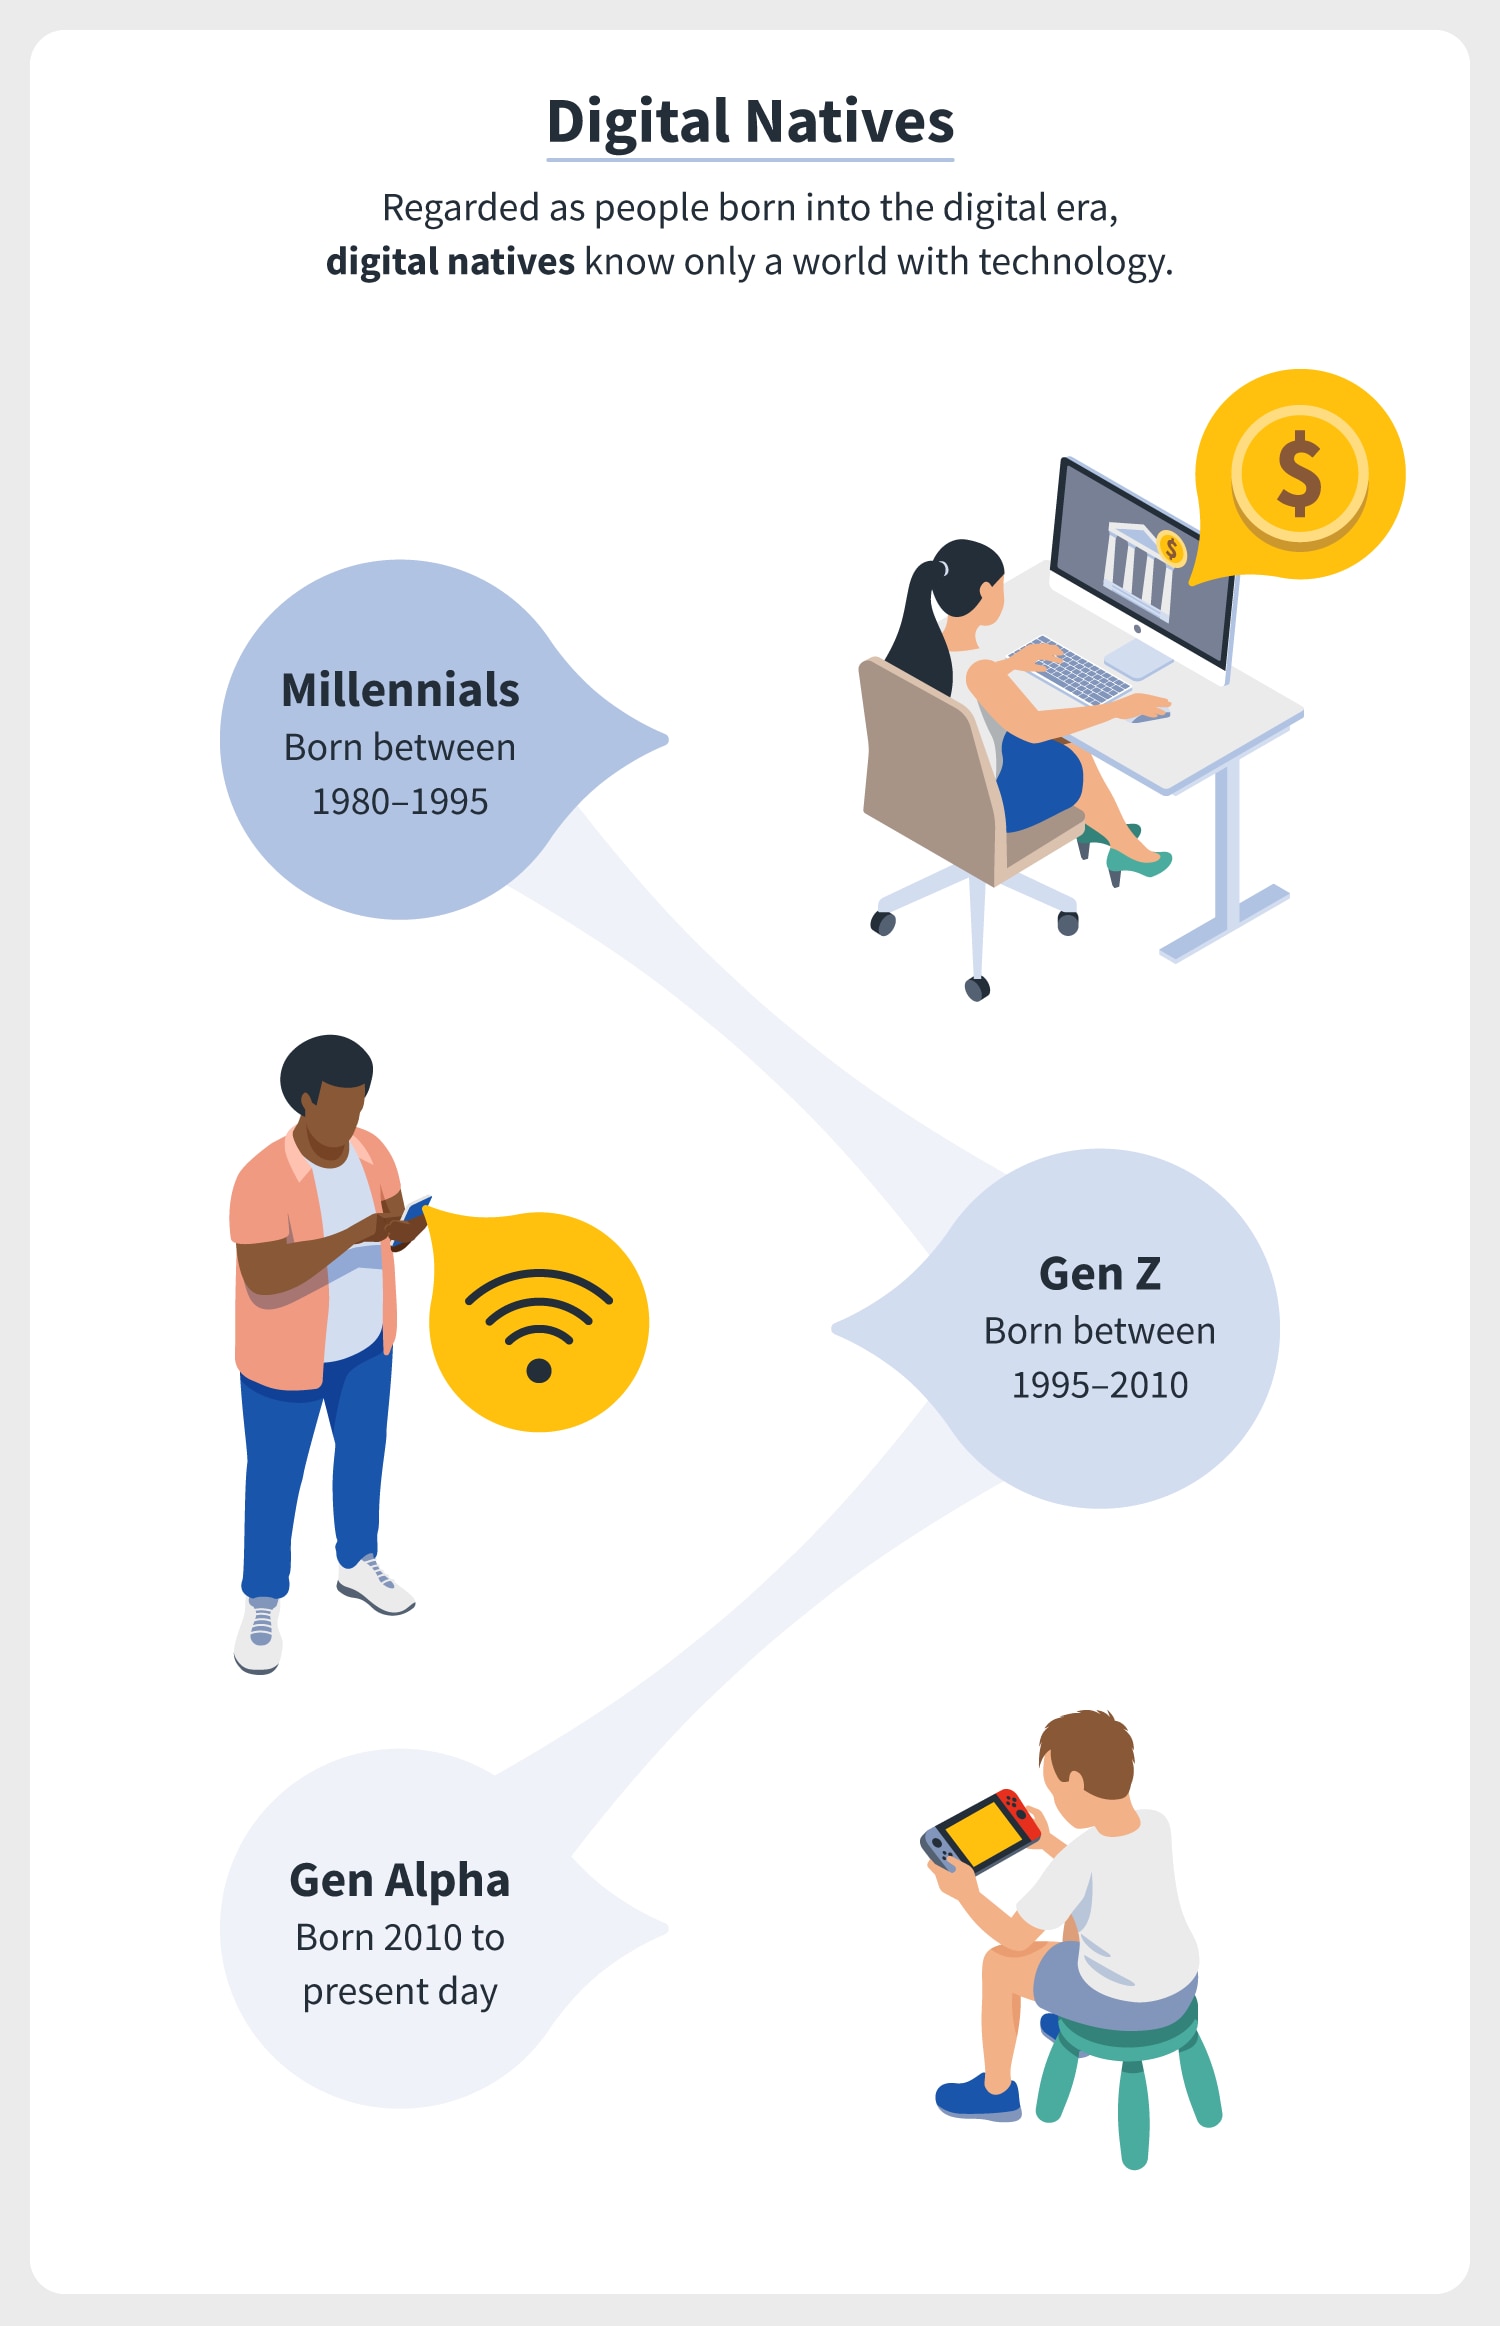 a Gen Alpha child plays a handheld video game, a Gen Z person is on their smartphone, and a Millenial is using an online banking platform, indicating that these digital generations are considered digital natives